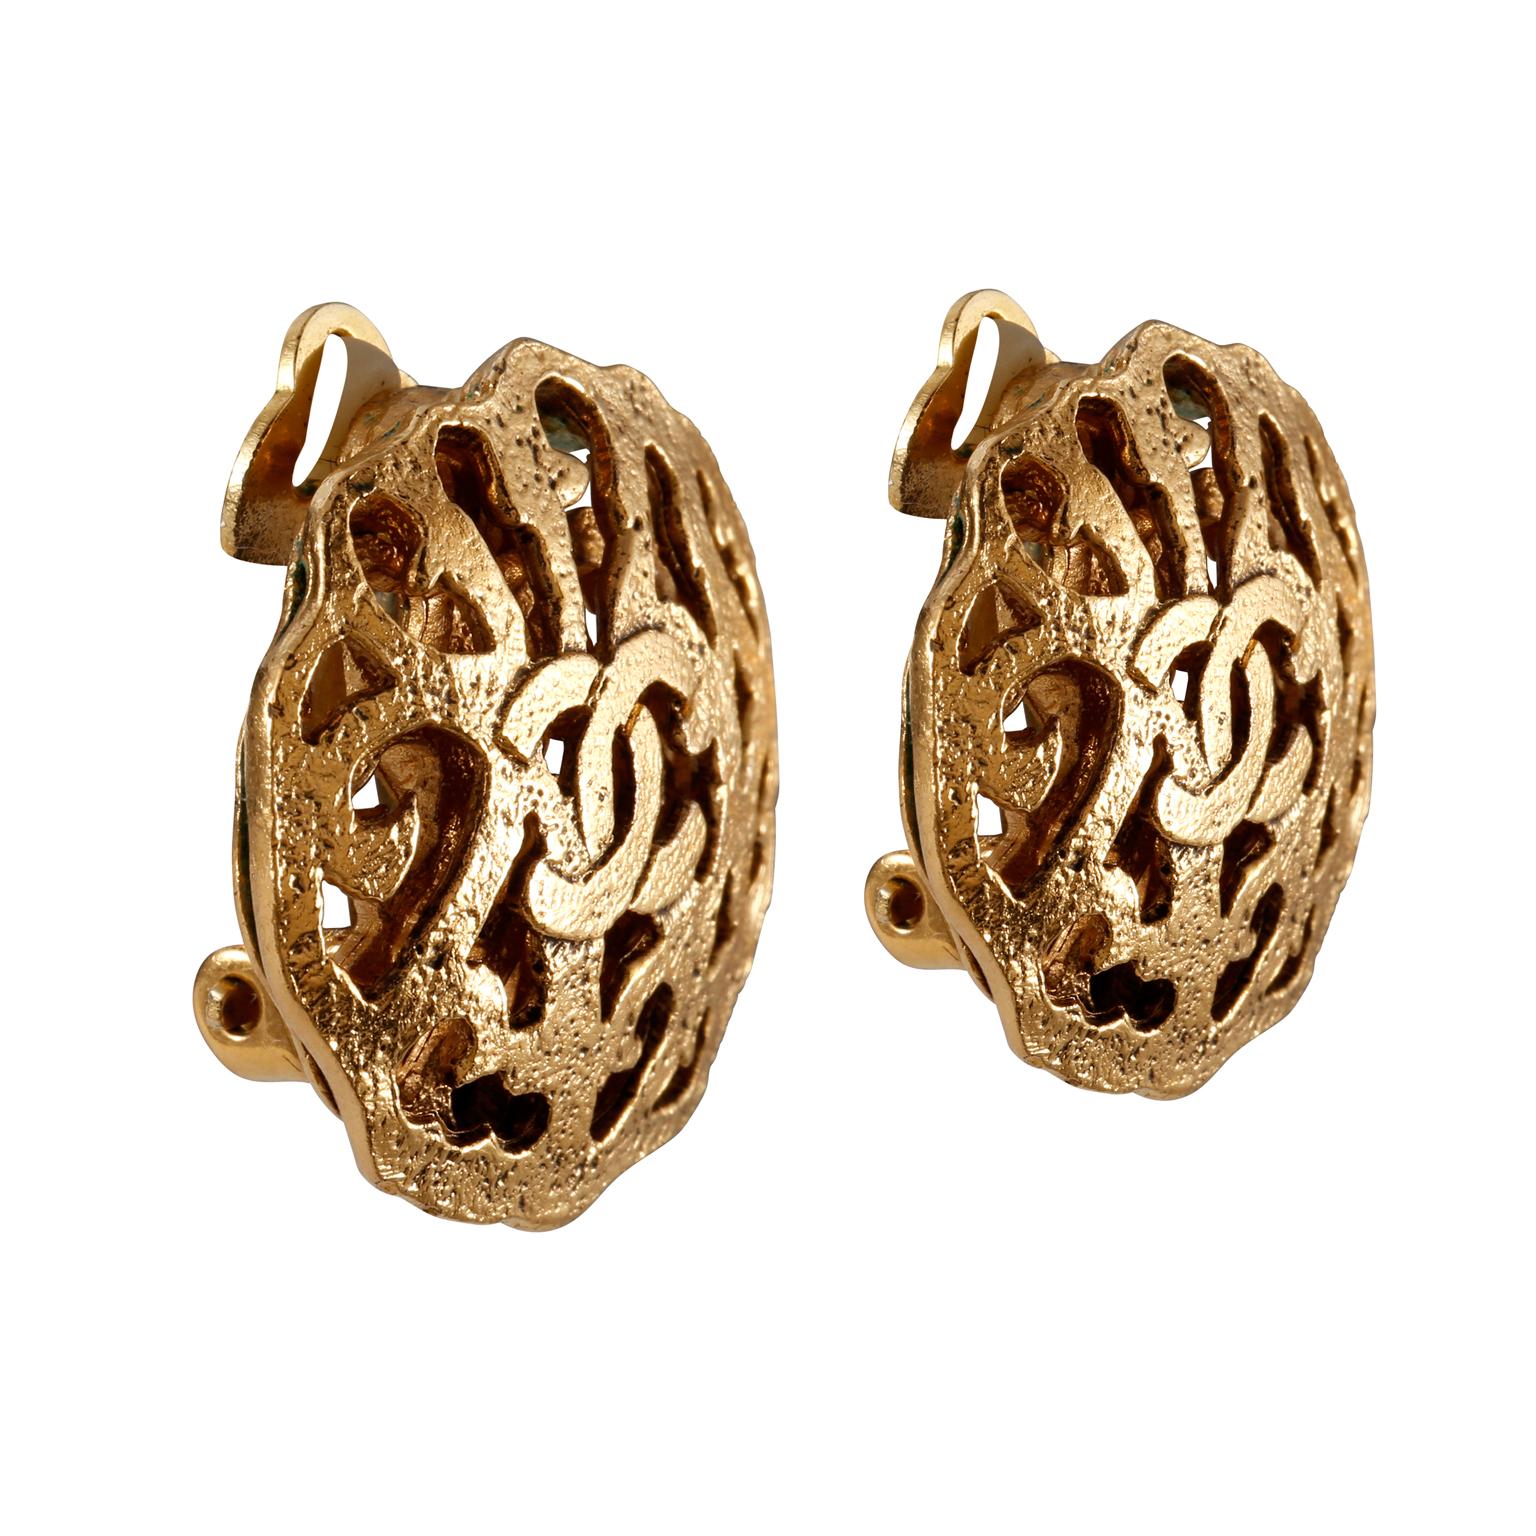 These authentic Chanel Gold CC Cut Out Button Earrings are in excellent condition from the mid 1980’s.  Gold tone round clip on earrings with ornate cut out design and interlocking CC.  Made in France. 
